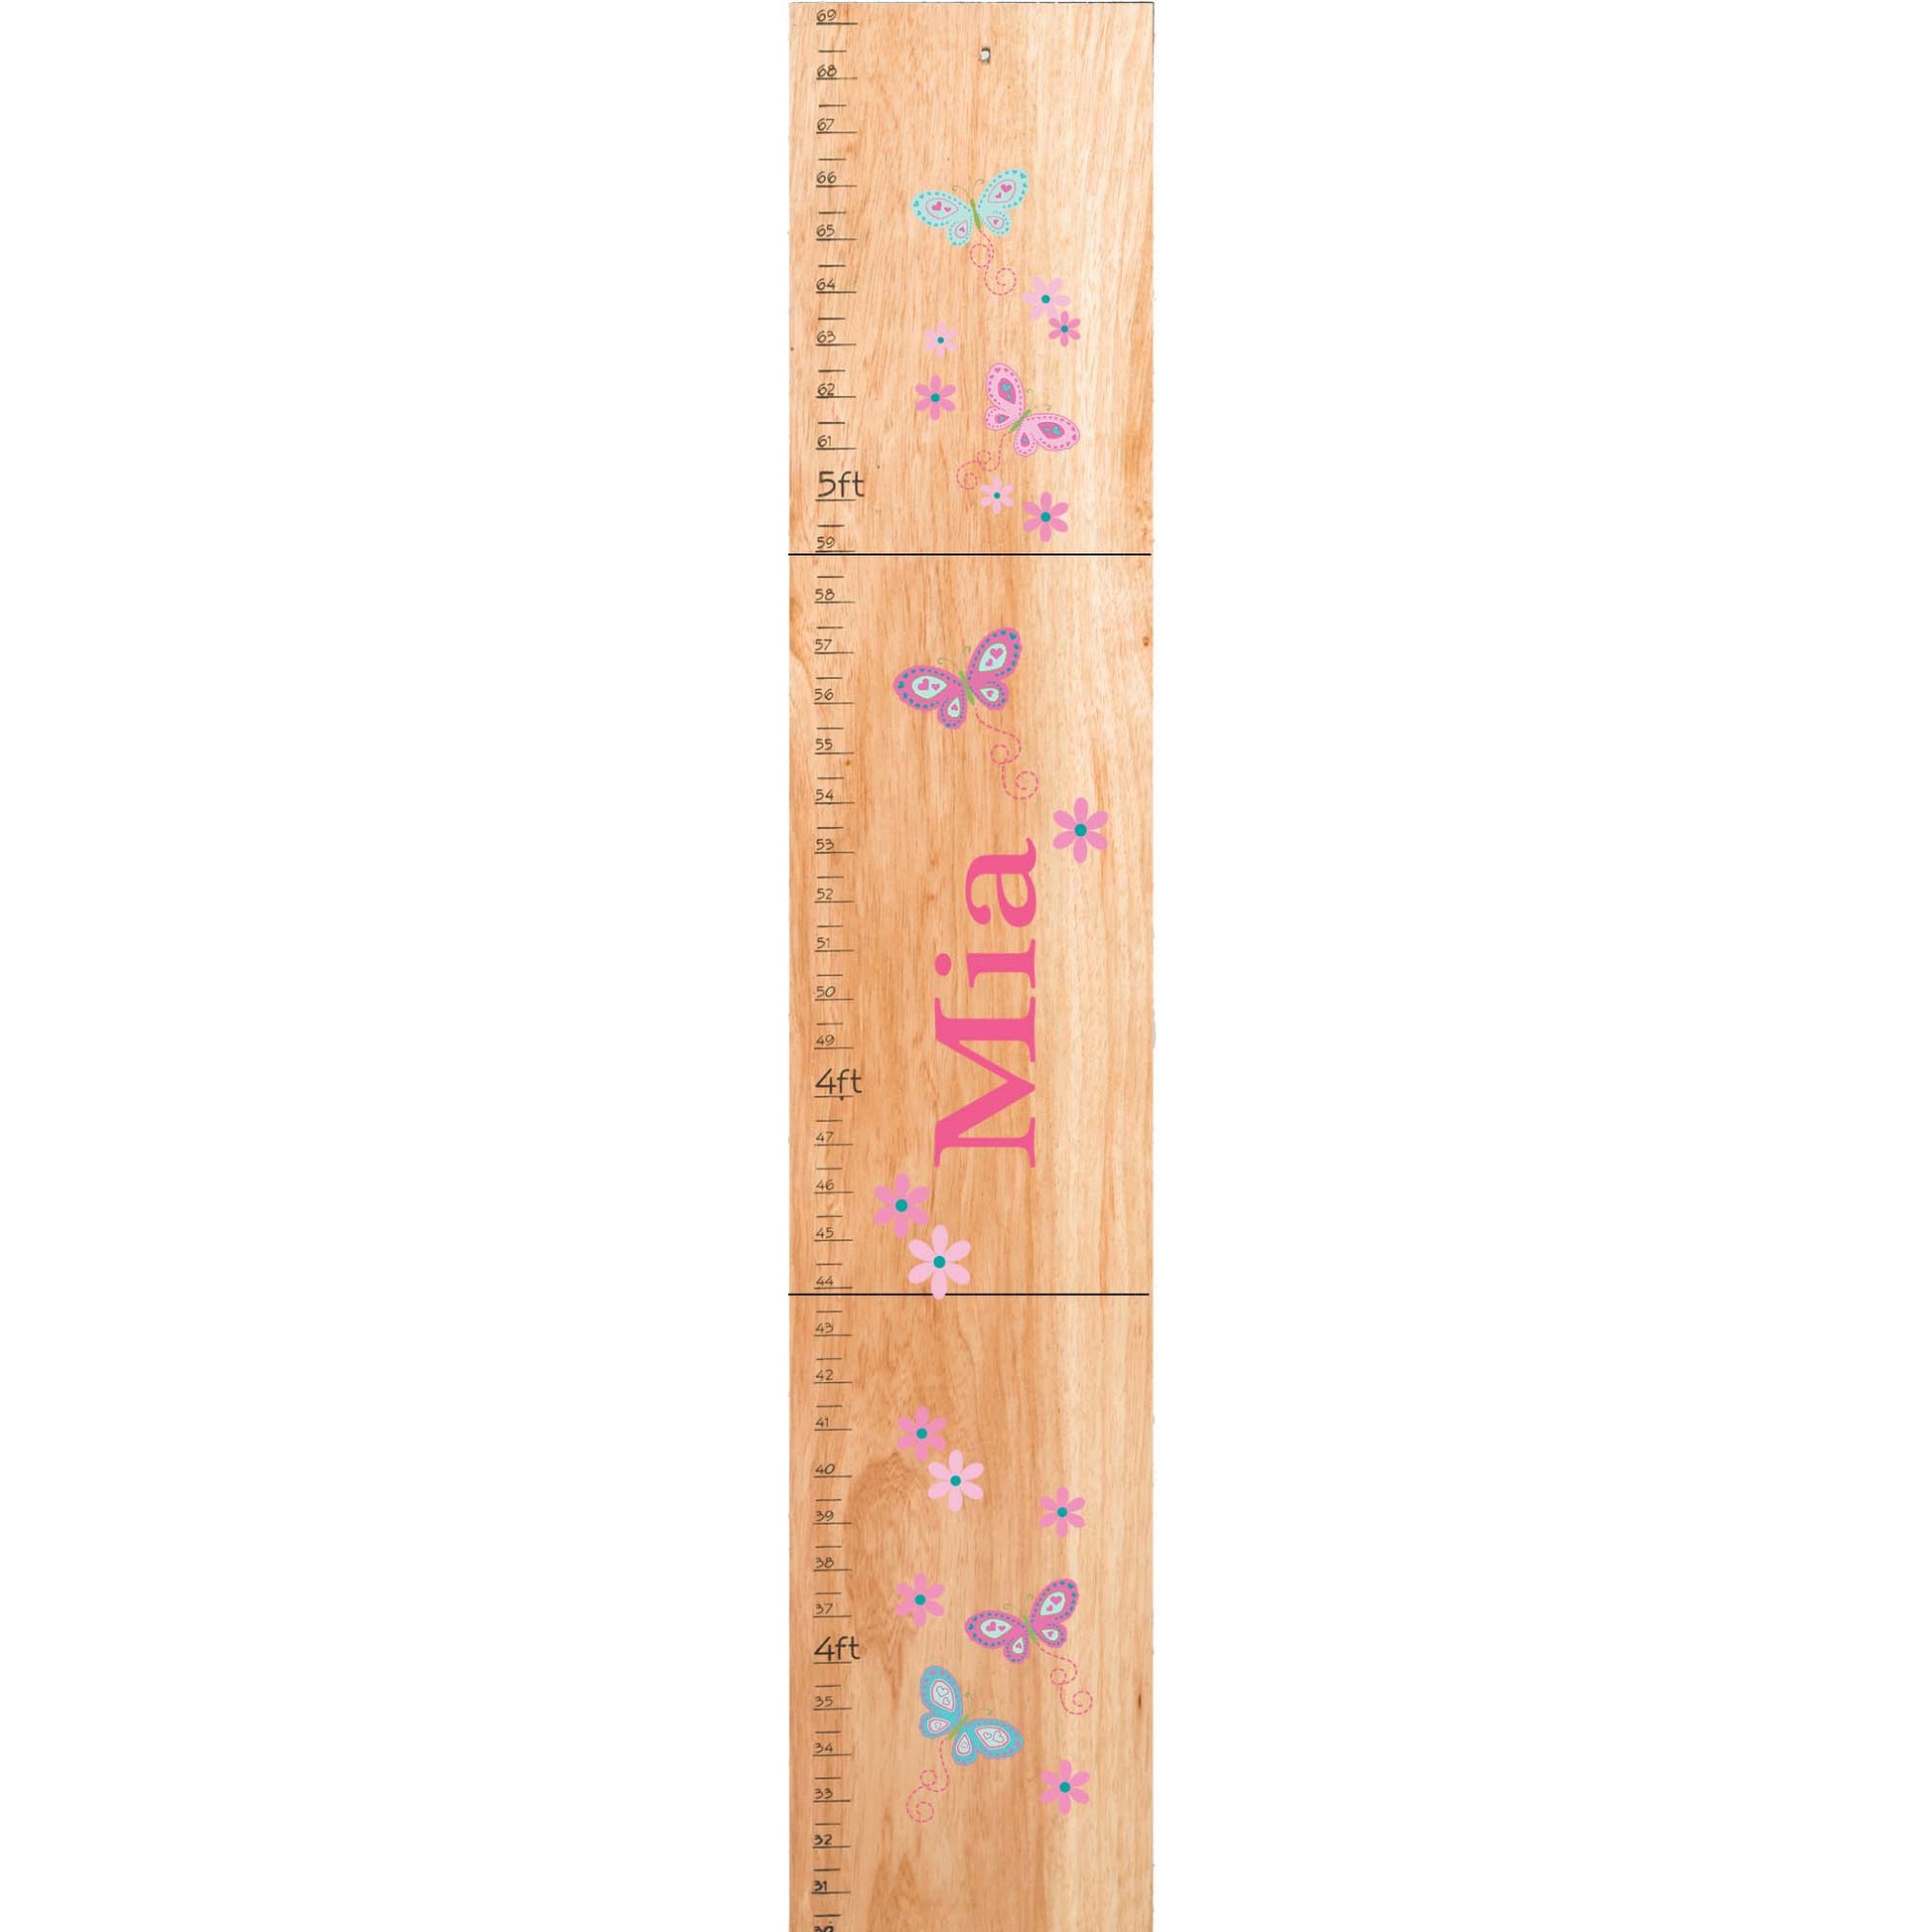 Personalized Natural Growth Chart With Butterflies Pink Aqua Design